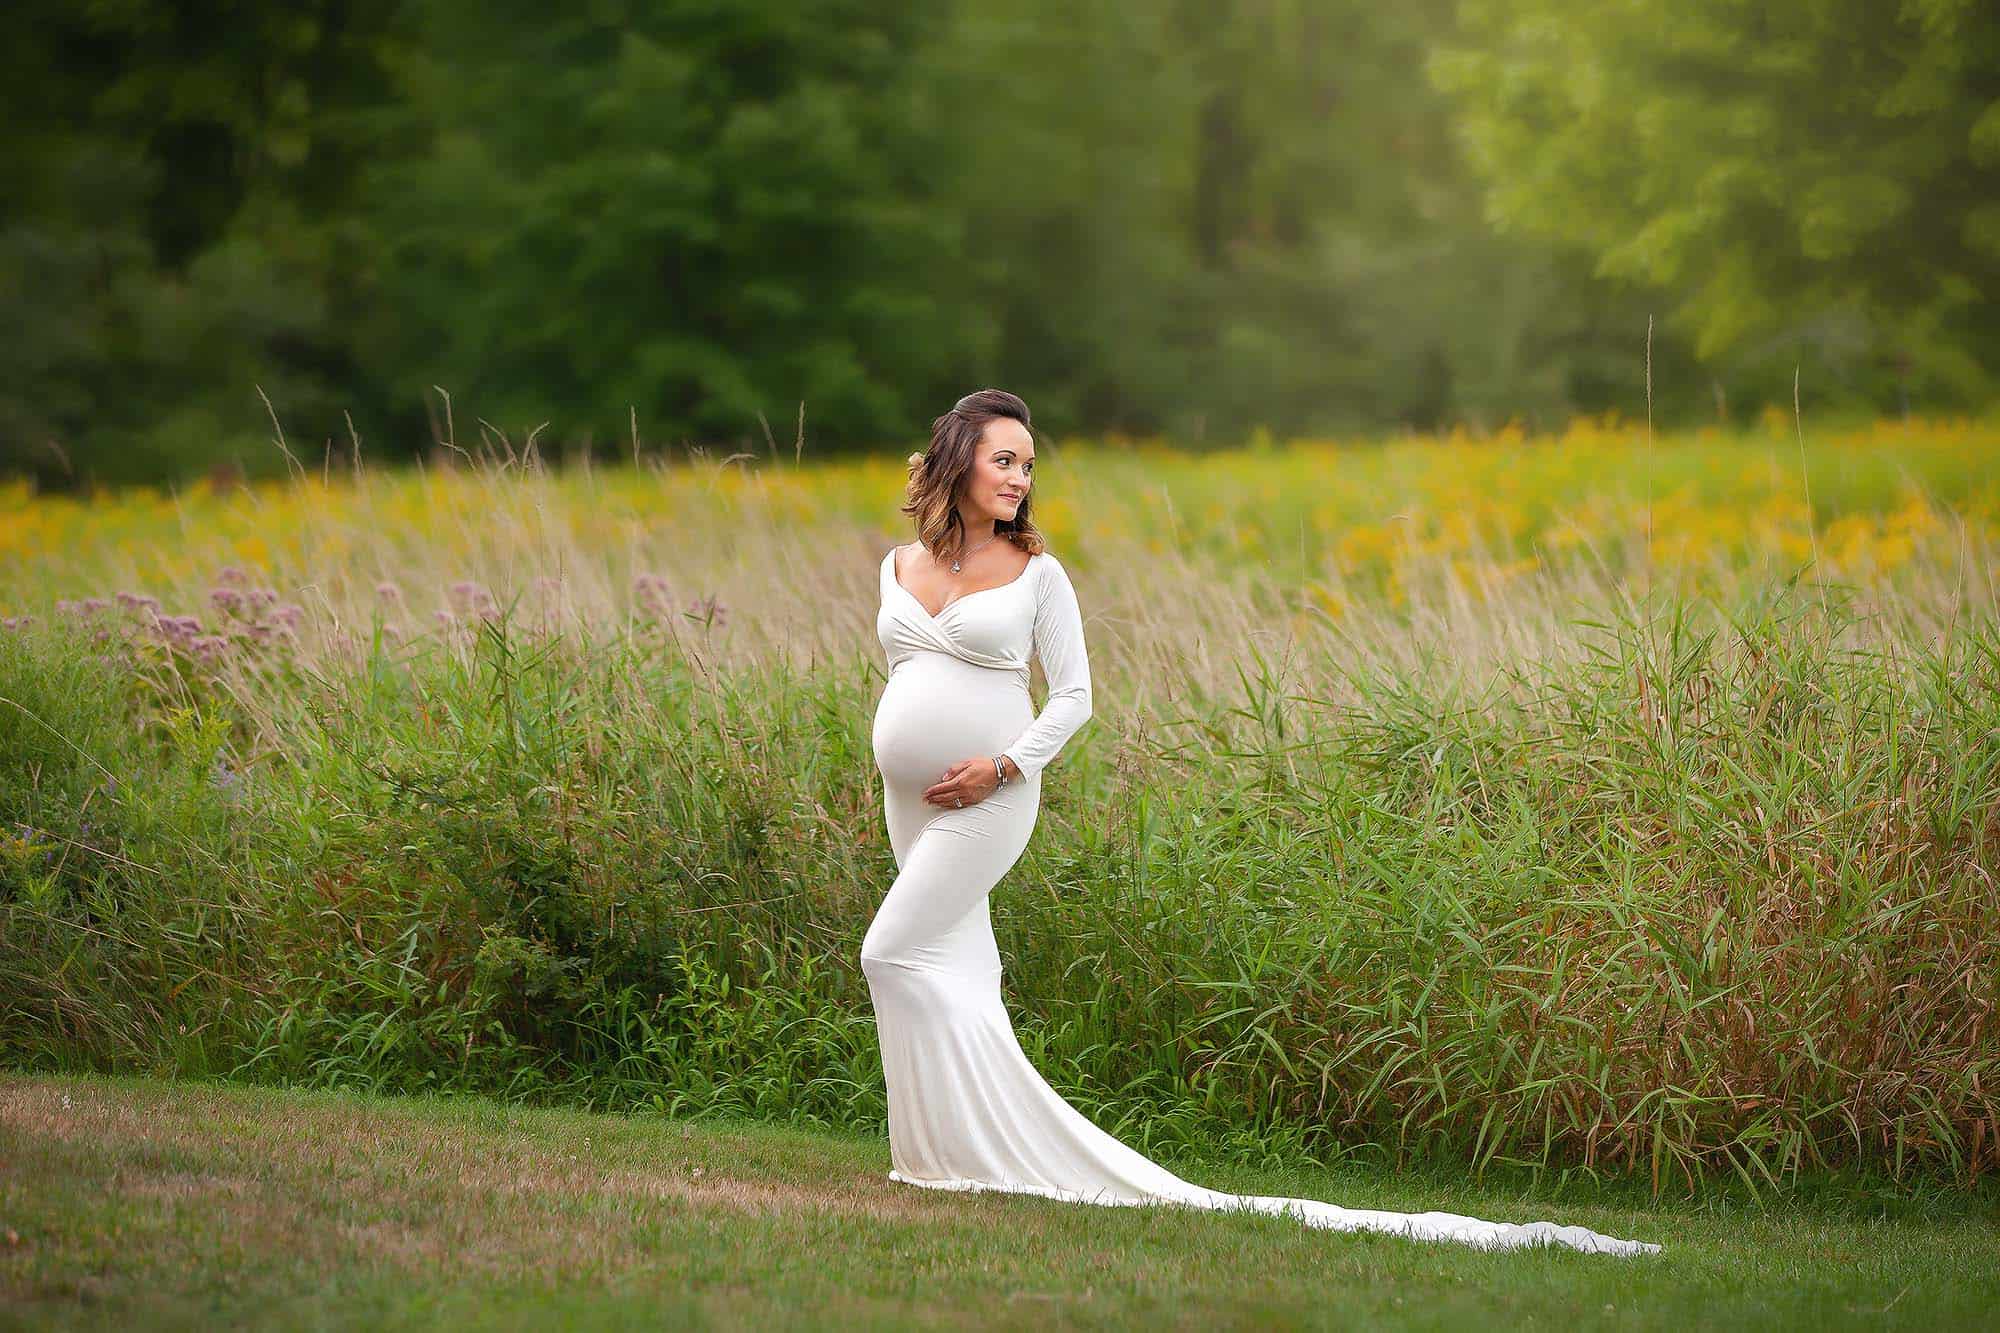 Derry NH Maternity Portrait. Pregnant woman standing in open field of tall green grass wearing a white dress.